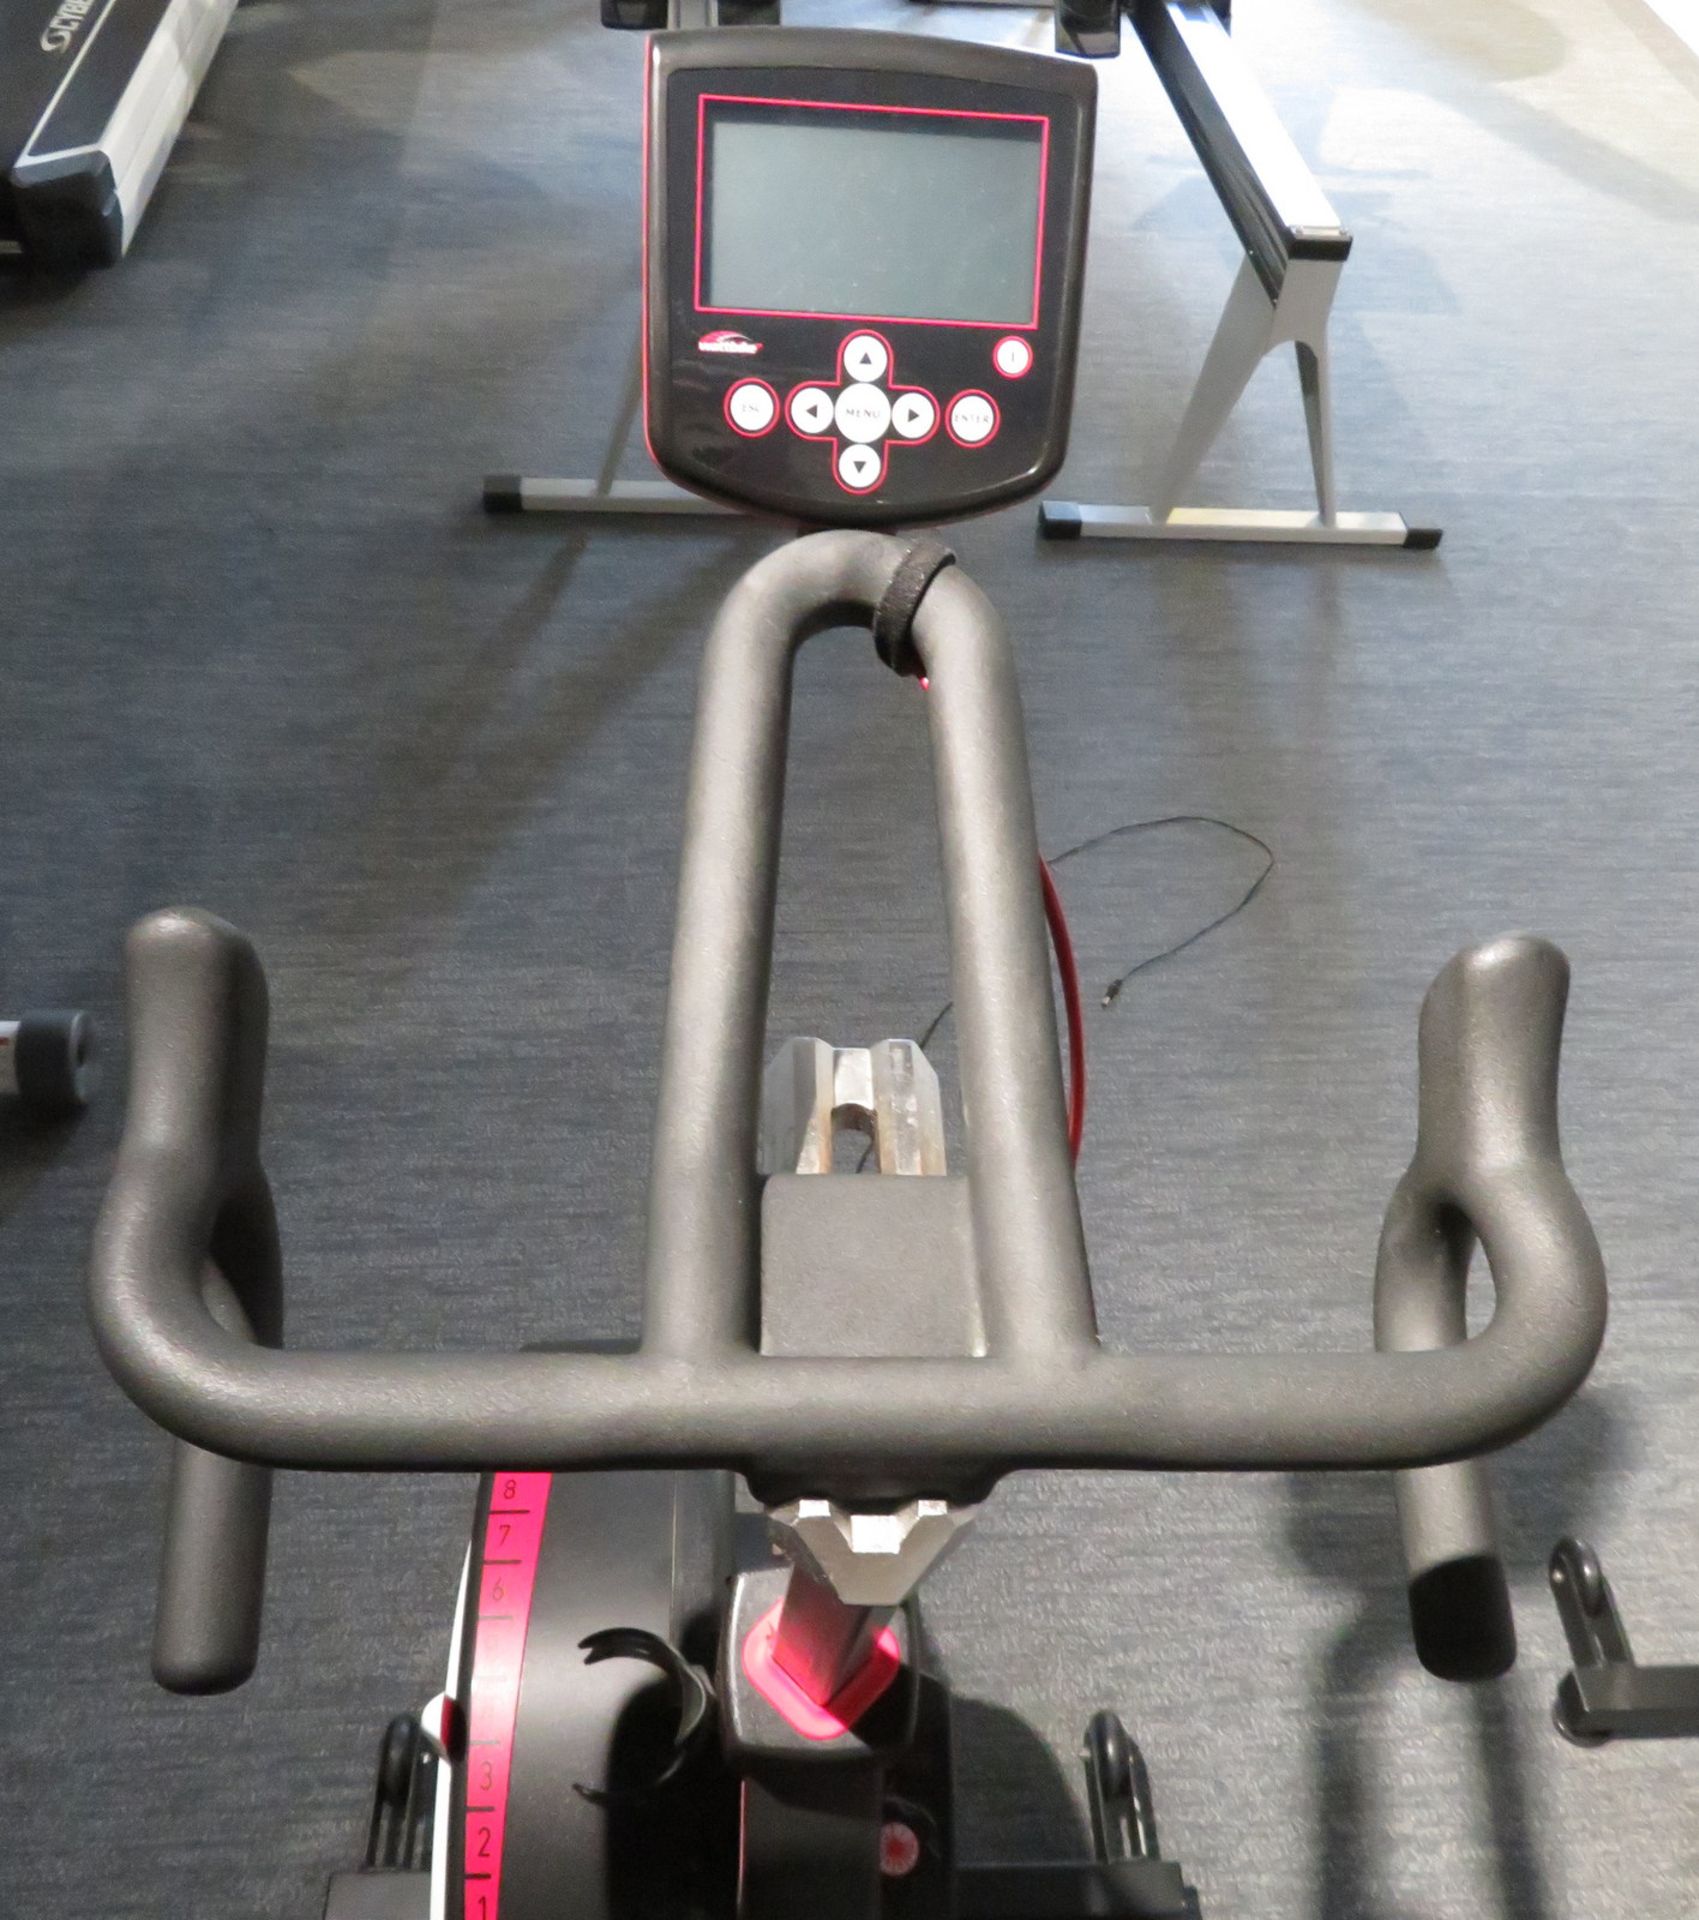 Watt Bike Pro Exercise Bike Complete With Model B Digital Display Console. Good Working Condition. - Image 7 of 8